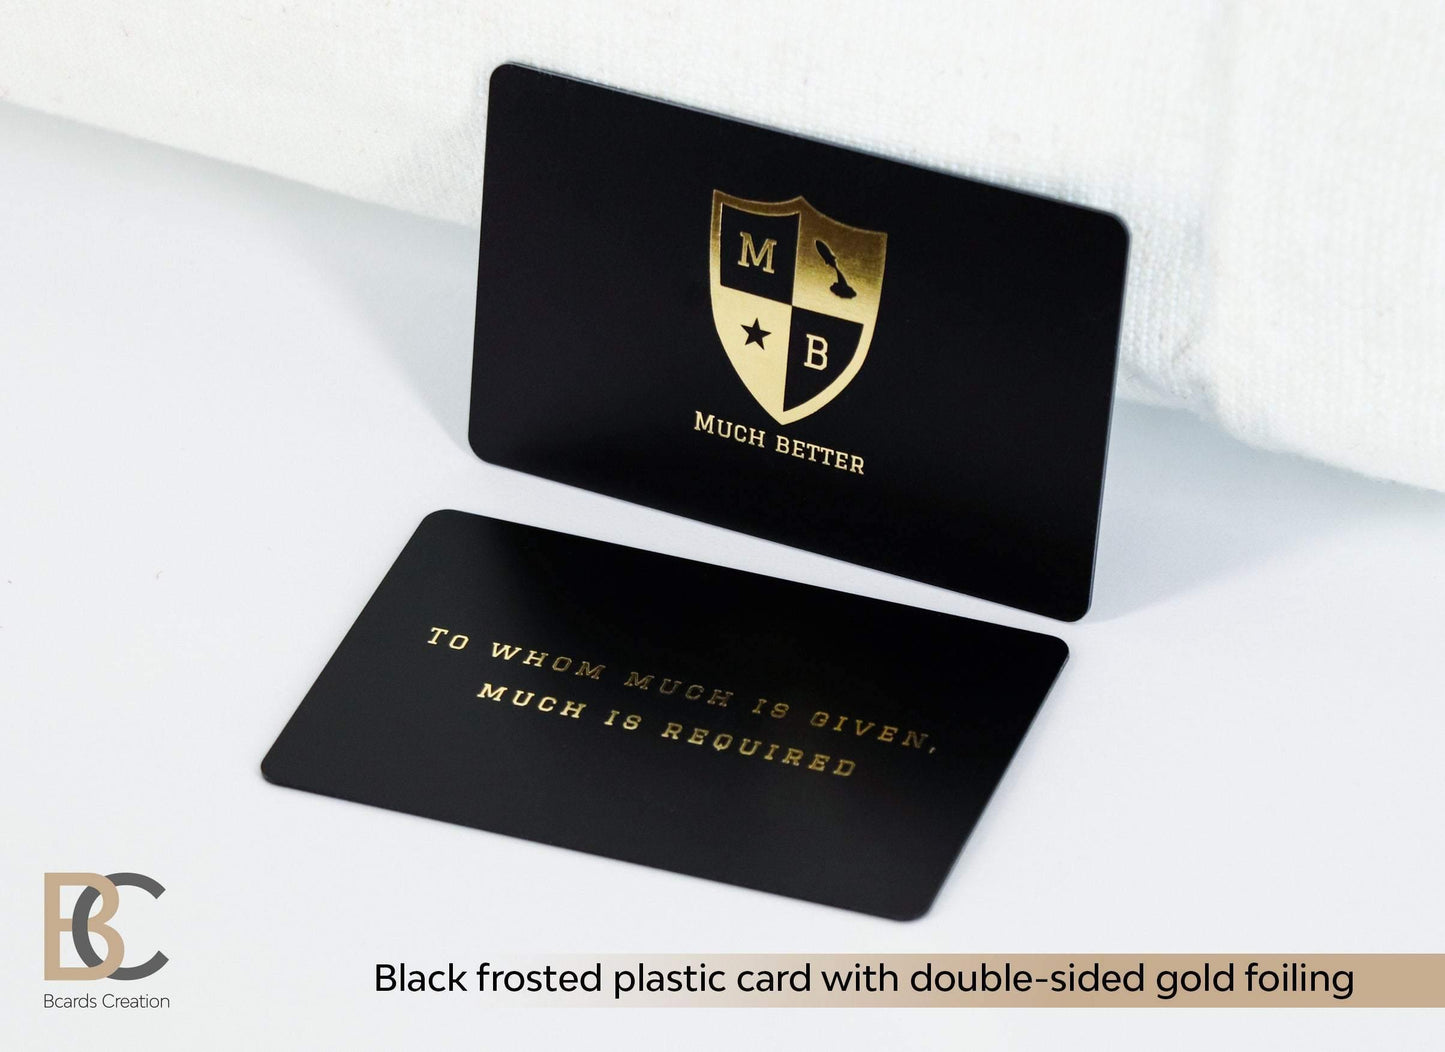 Black Frosted plastic card, 1-3 foils, full color printing, double sided, Real gold foil | Thick PVC Plastic Business Cards - BcardsCreation